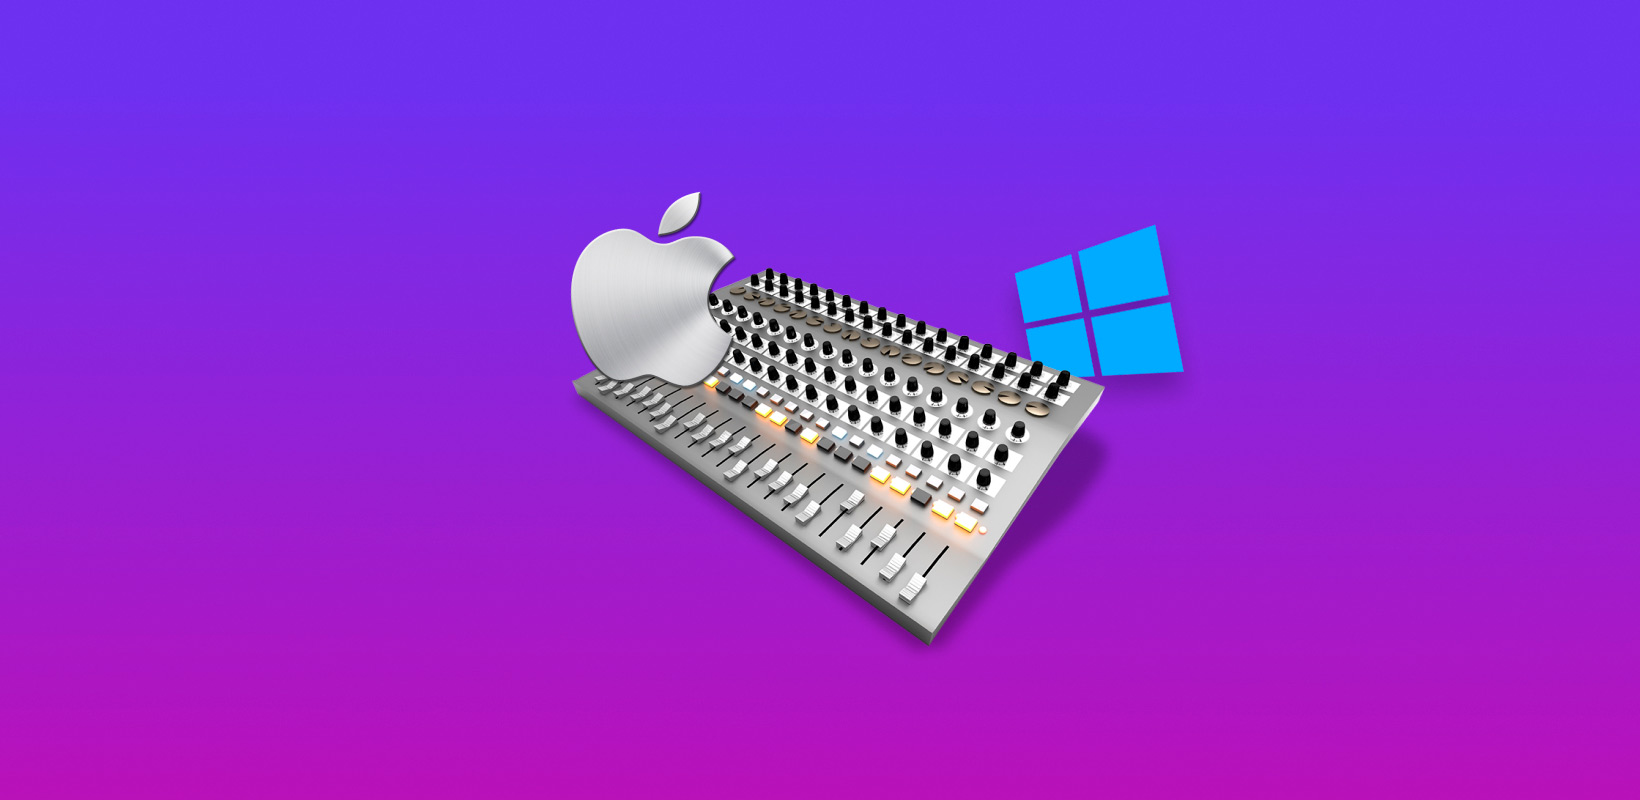 mac vs pc for music production 2016